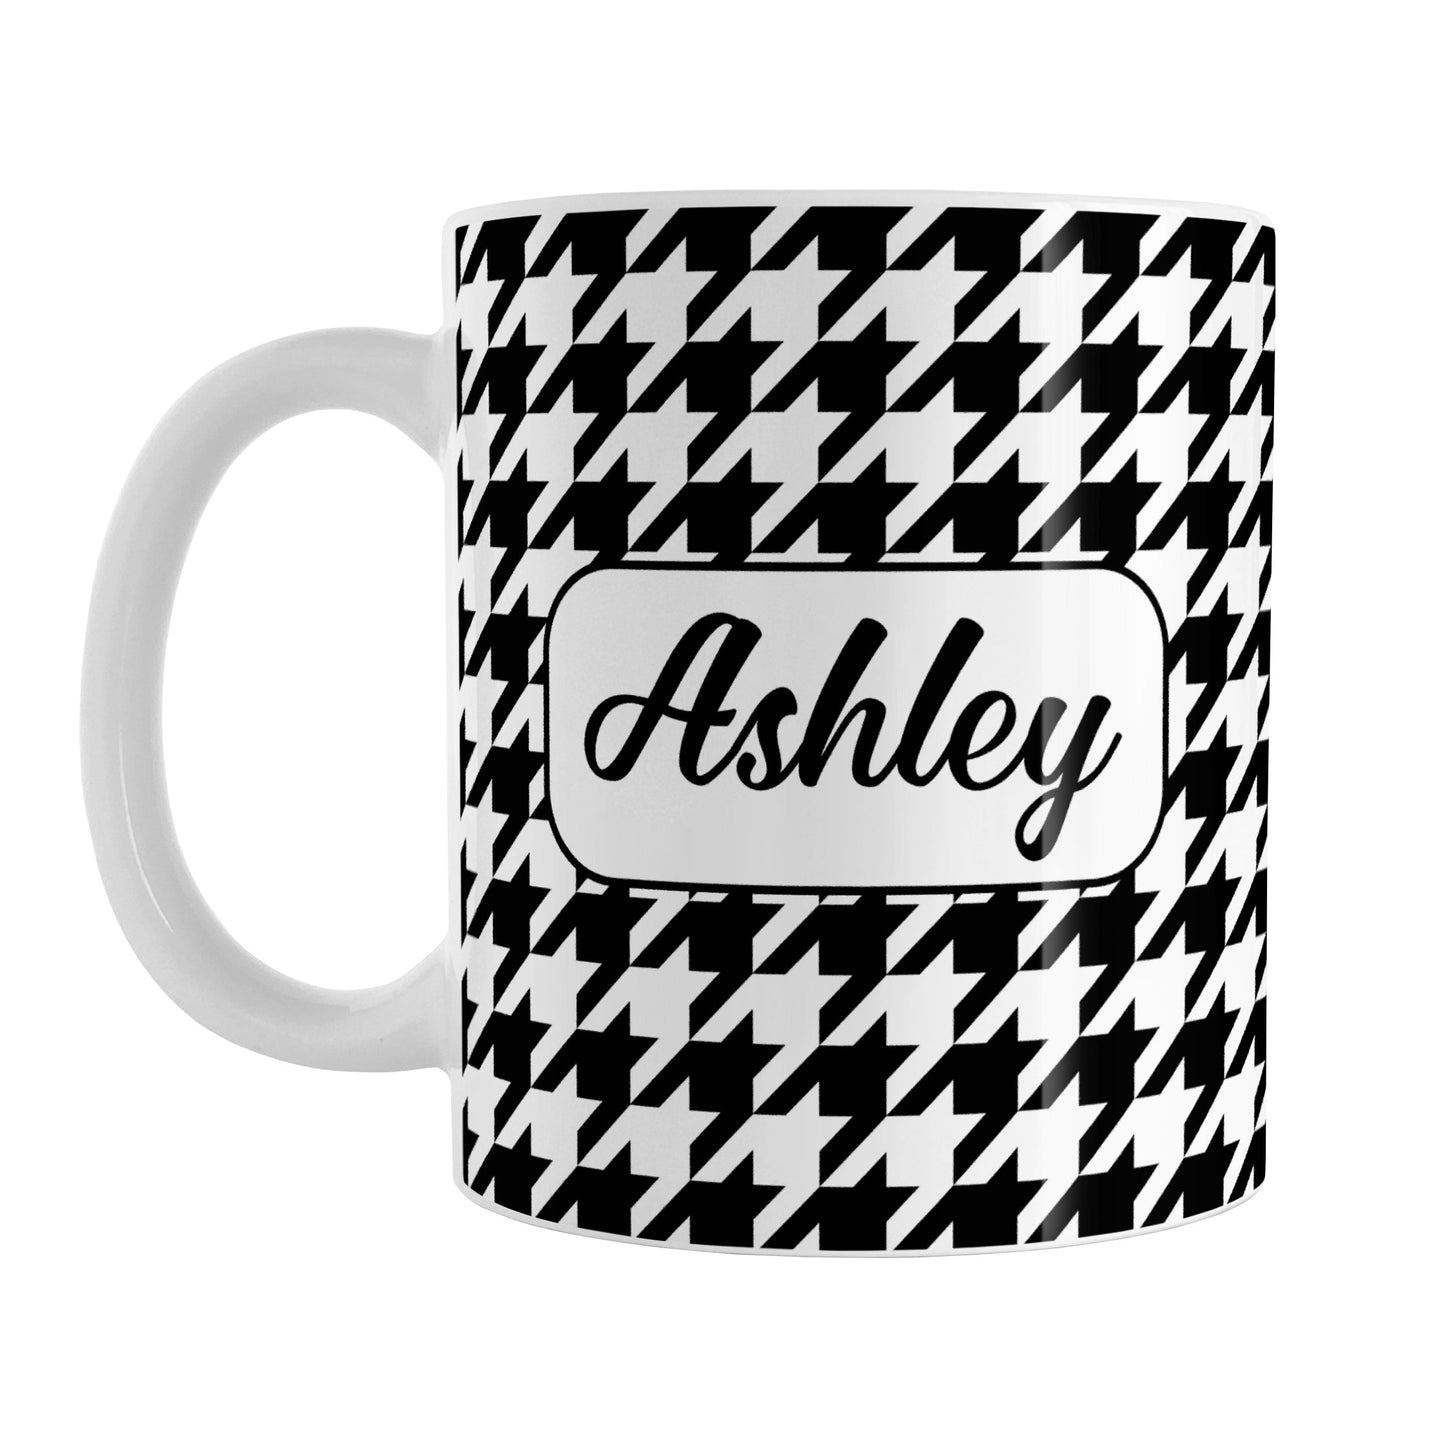 Personalized Black and White Houndstooth Mug (11oz) at Amy's Coffee Mugs